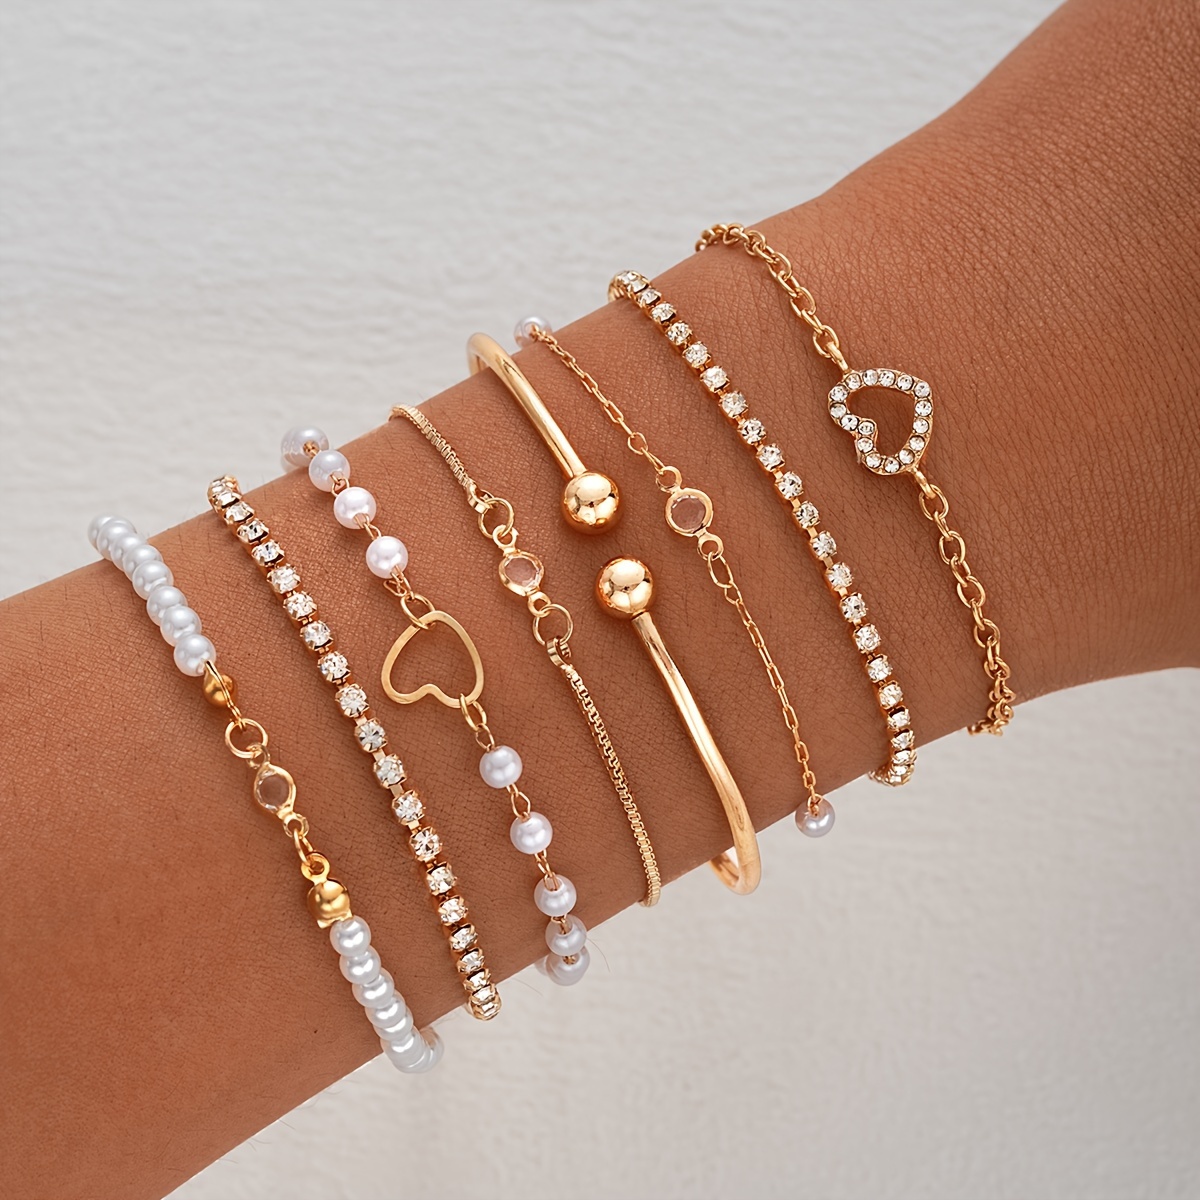 

8 Pcs Fashionable Elegant Golden Imitation Pearl Bracelets & Open Heart Bangle Multi-piece Jewelry Set For Daily & Party Wear, Layering Trendy Accessories, Vintage & Elegant Style